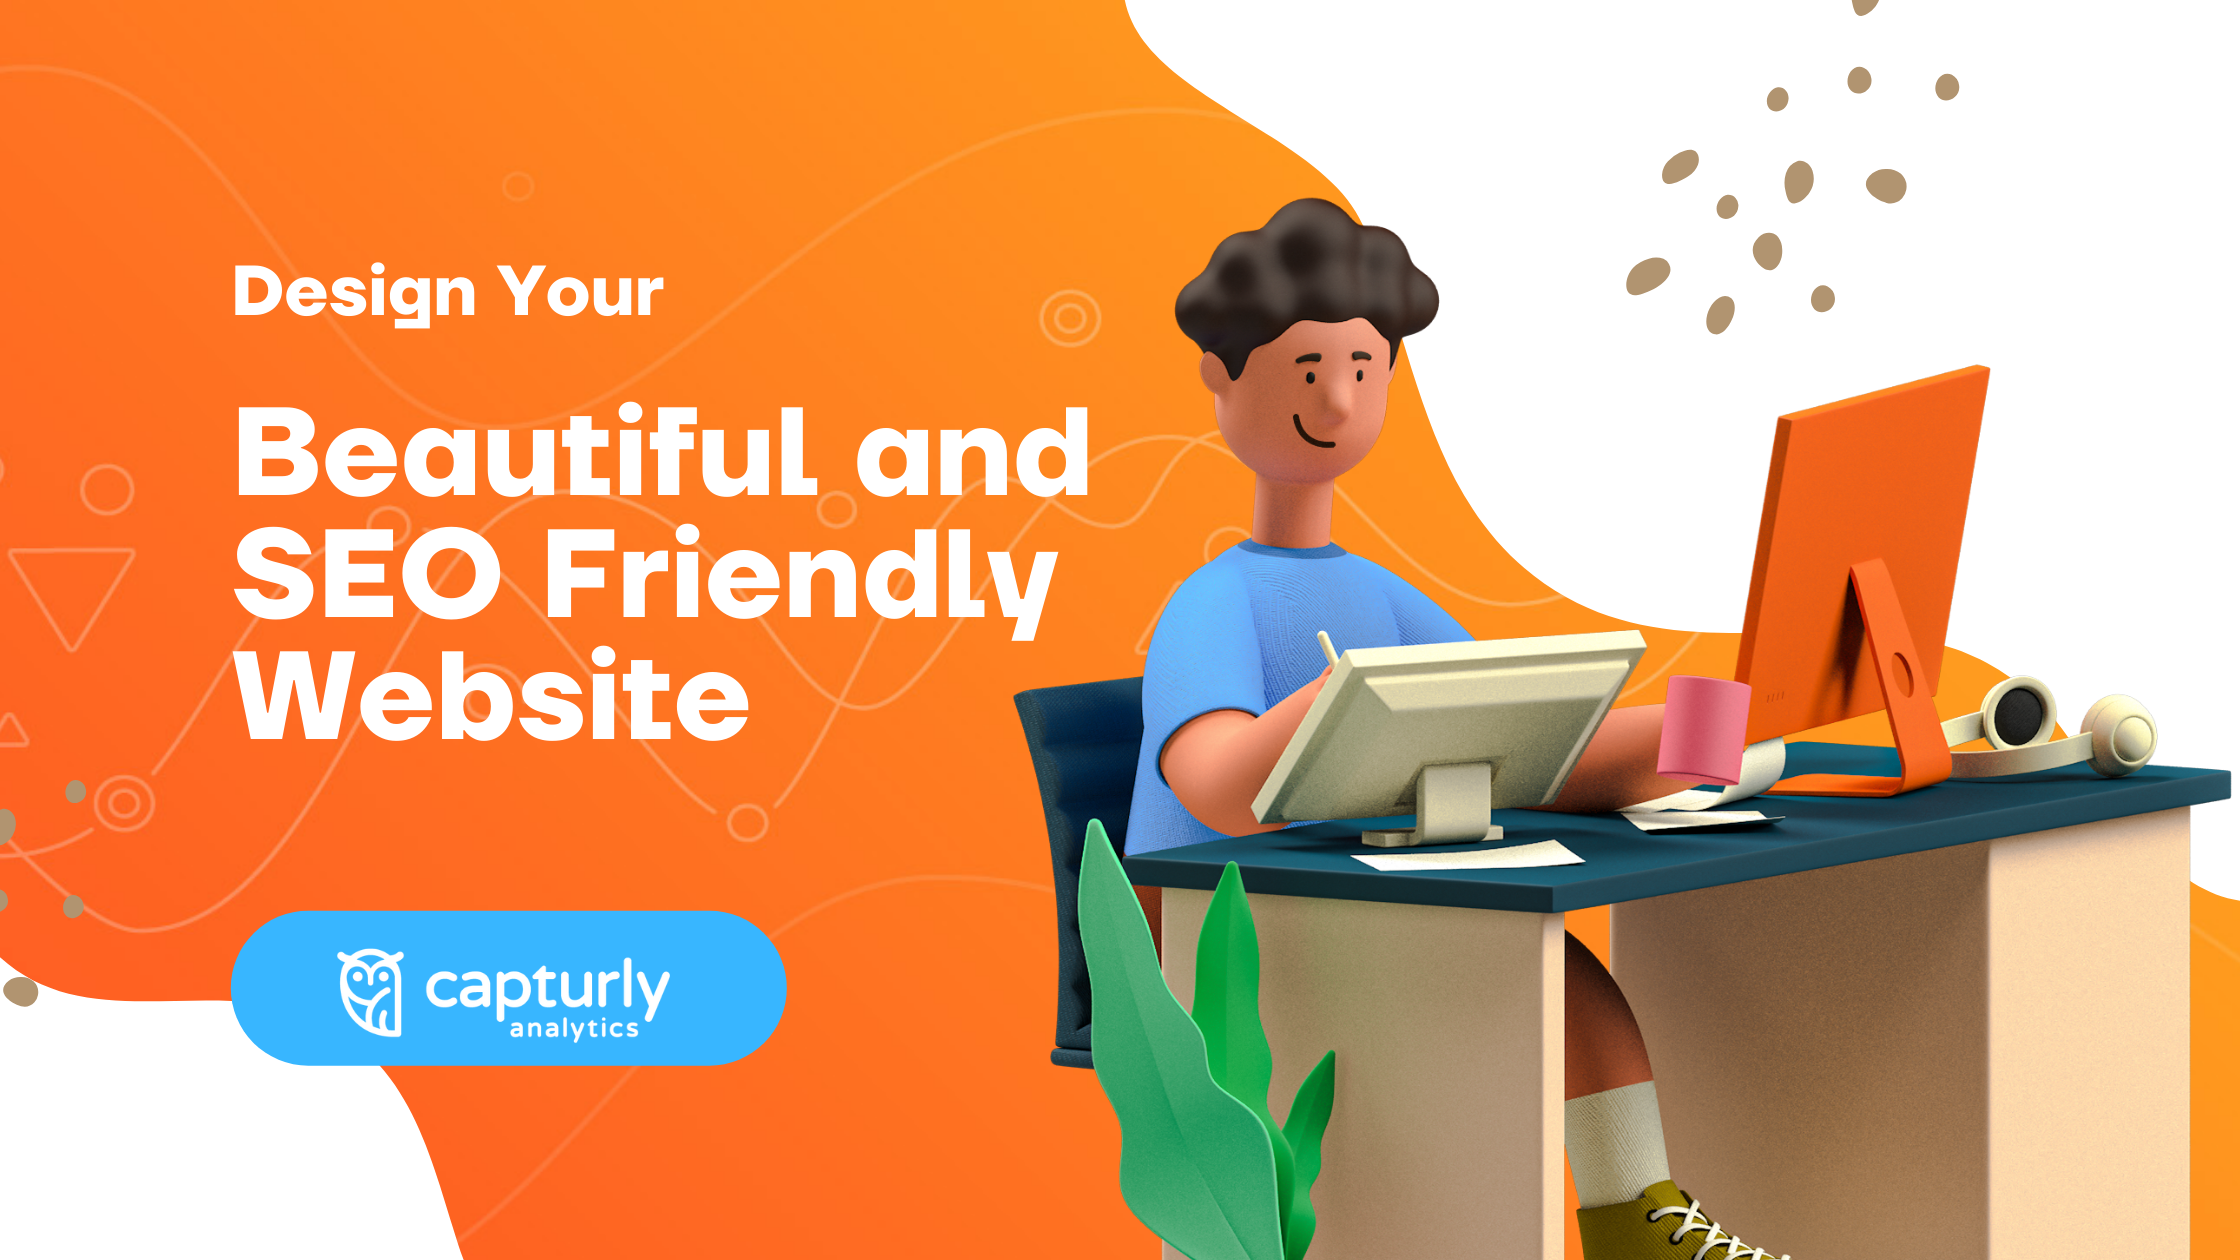 Design Beautiful and SEO Friendly Website